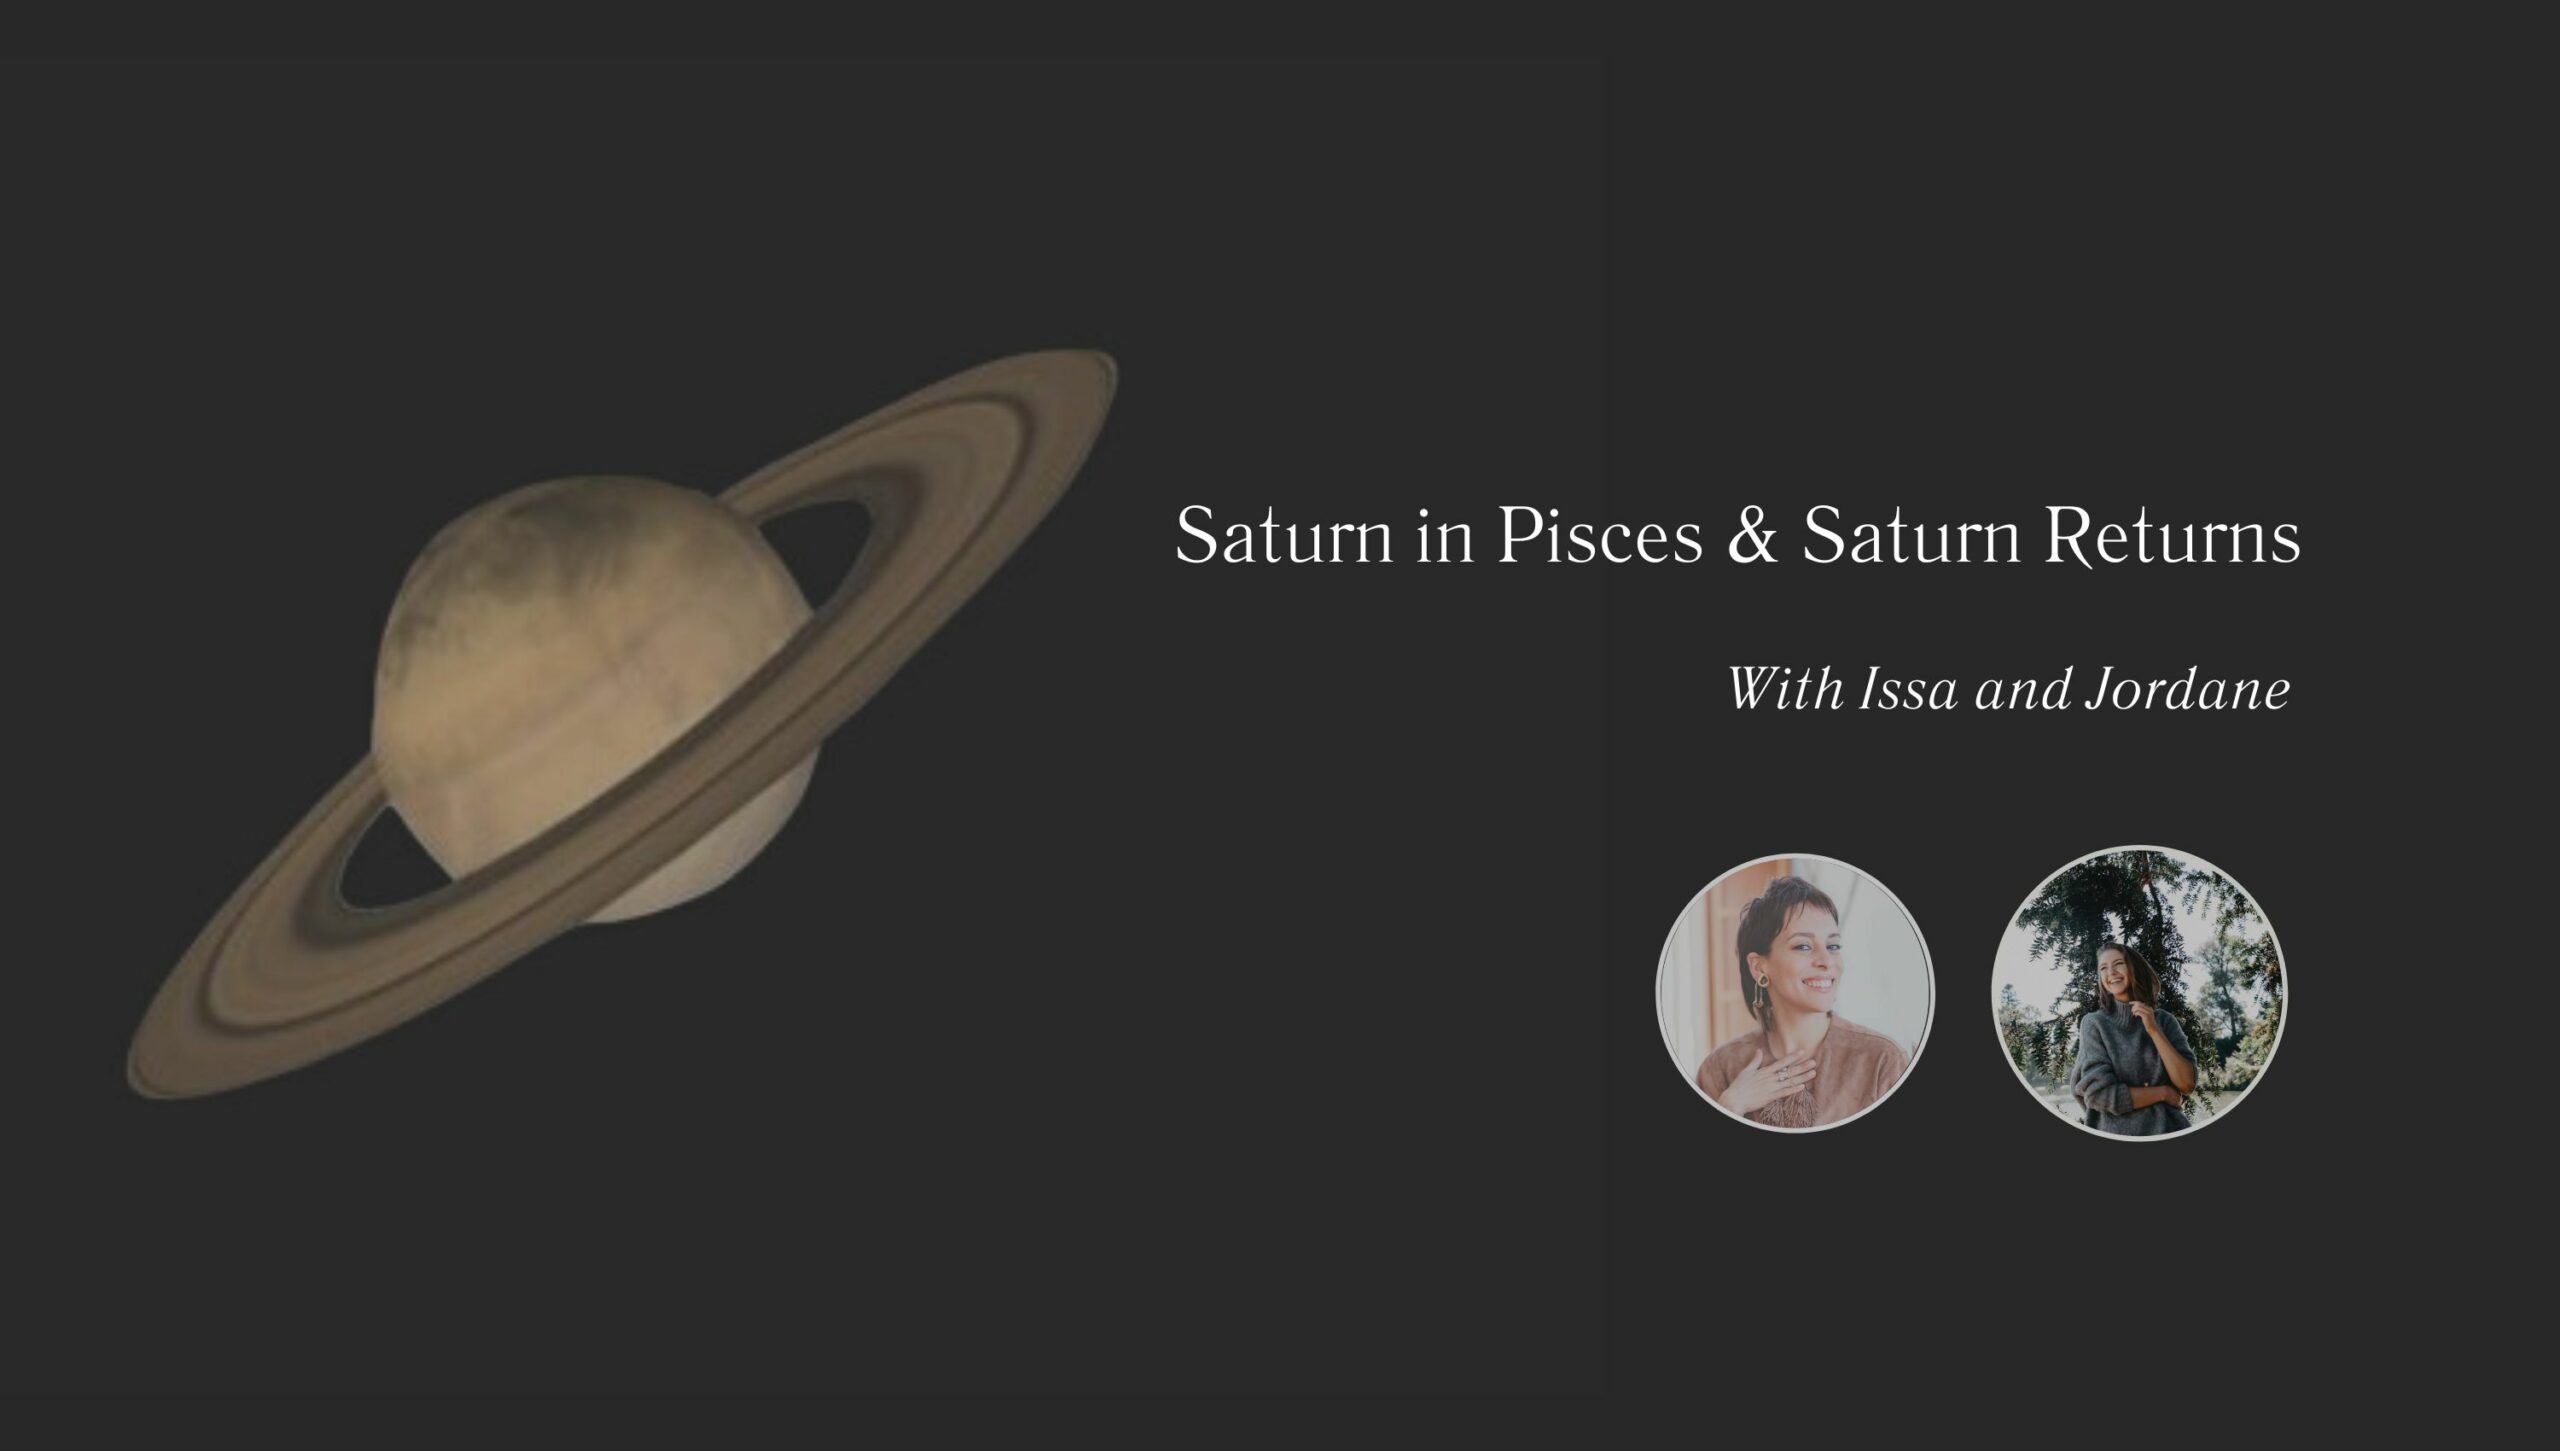 Saturn in Pisces & Saturn Returns Girl and Her Moon the Podcast